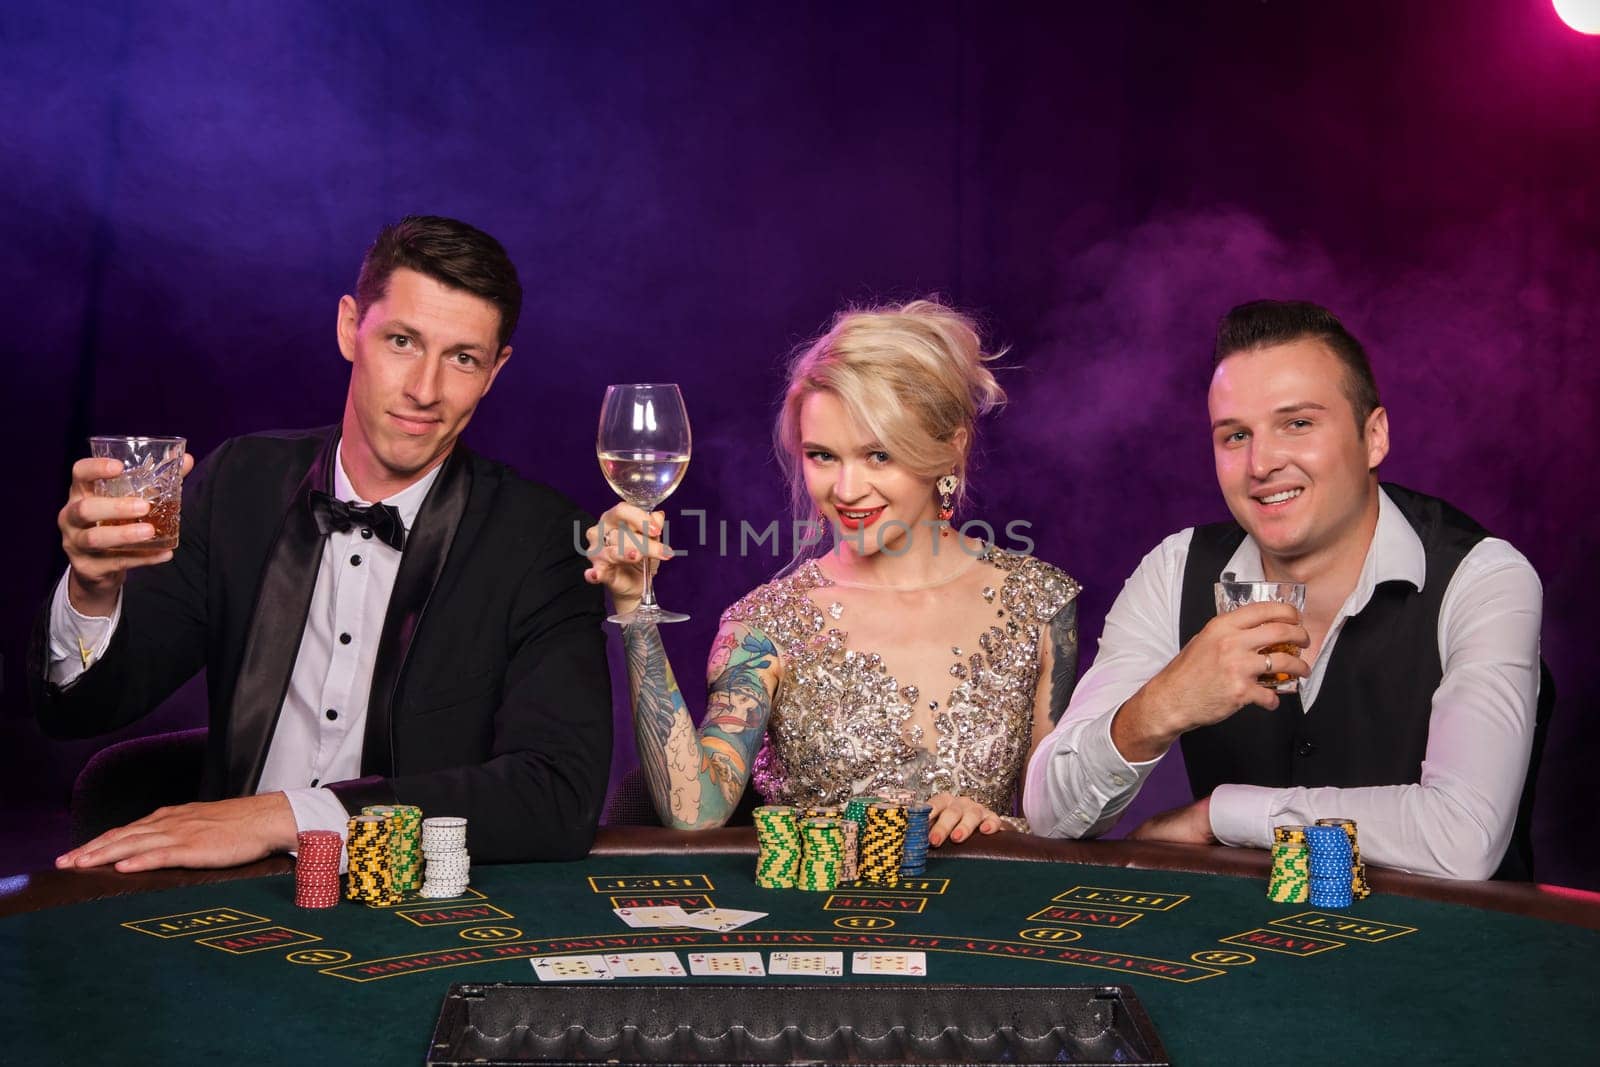 Two stylish men and cute maiden are playing poker at casino. Youth are making bets waiting for a big win. They are smiling and posing sitting at the table against a red and blue backlights on black smoke background. Cards, chips, money, gambling, entertainment concept.